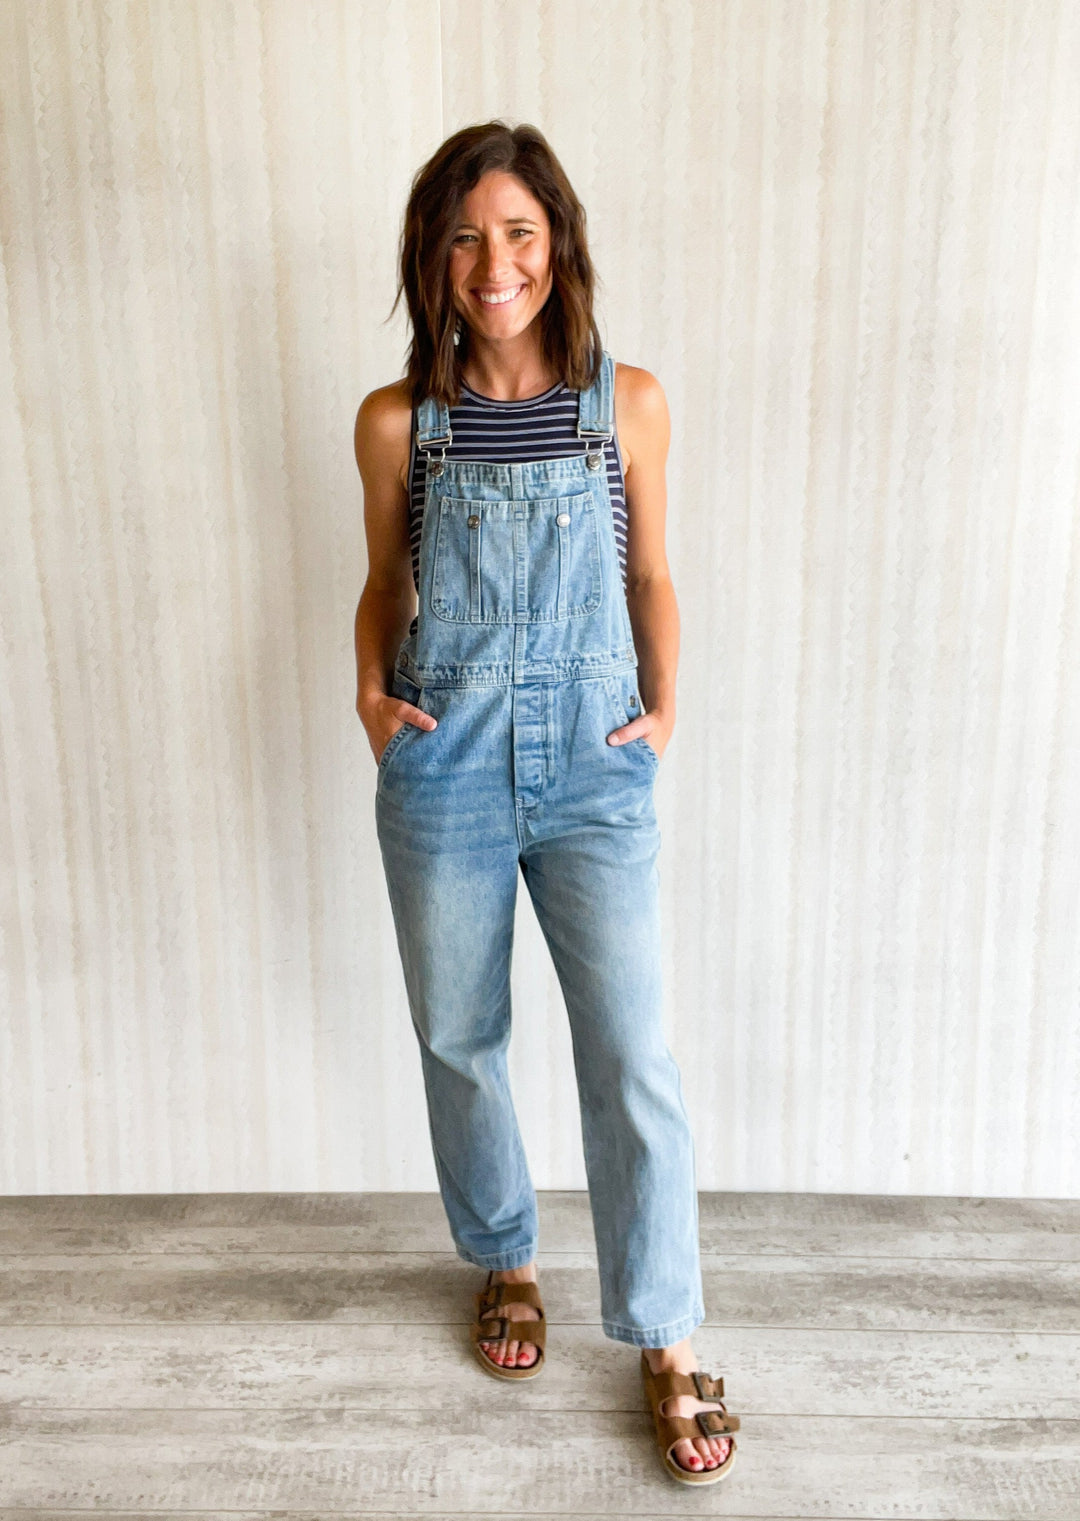 Women's Denim Overalls with navy and white striped tank top.